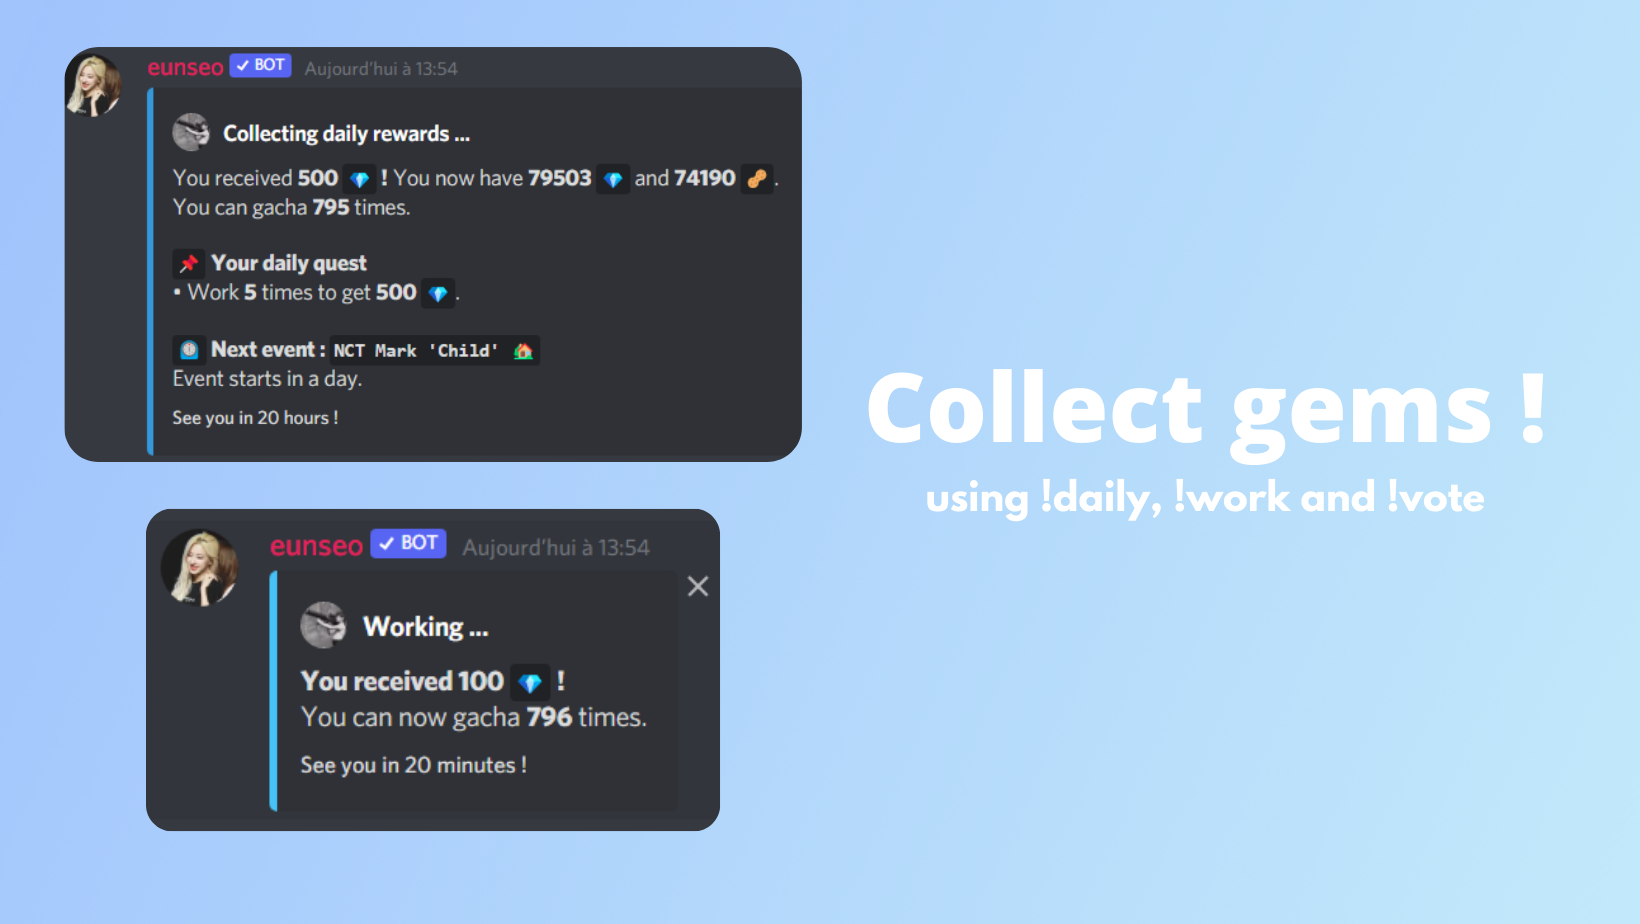 Collect the gems ‘daily’, ‘work’ and ‘vote’